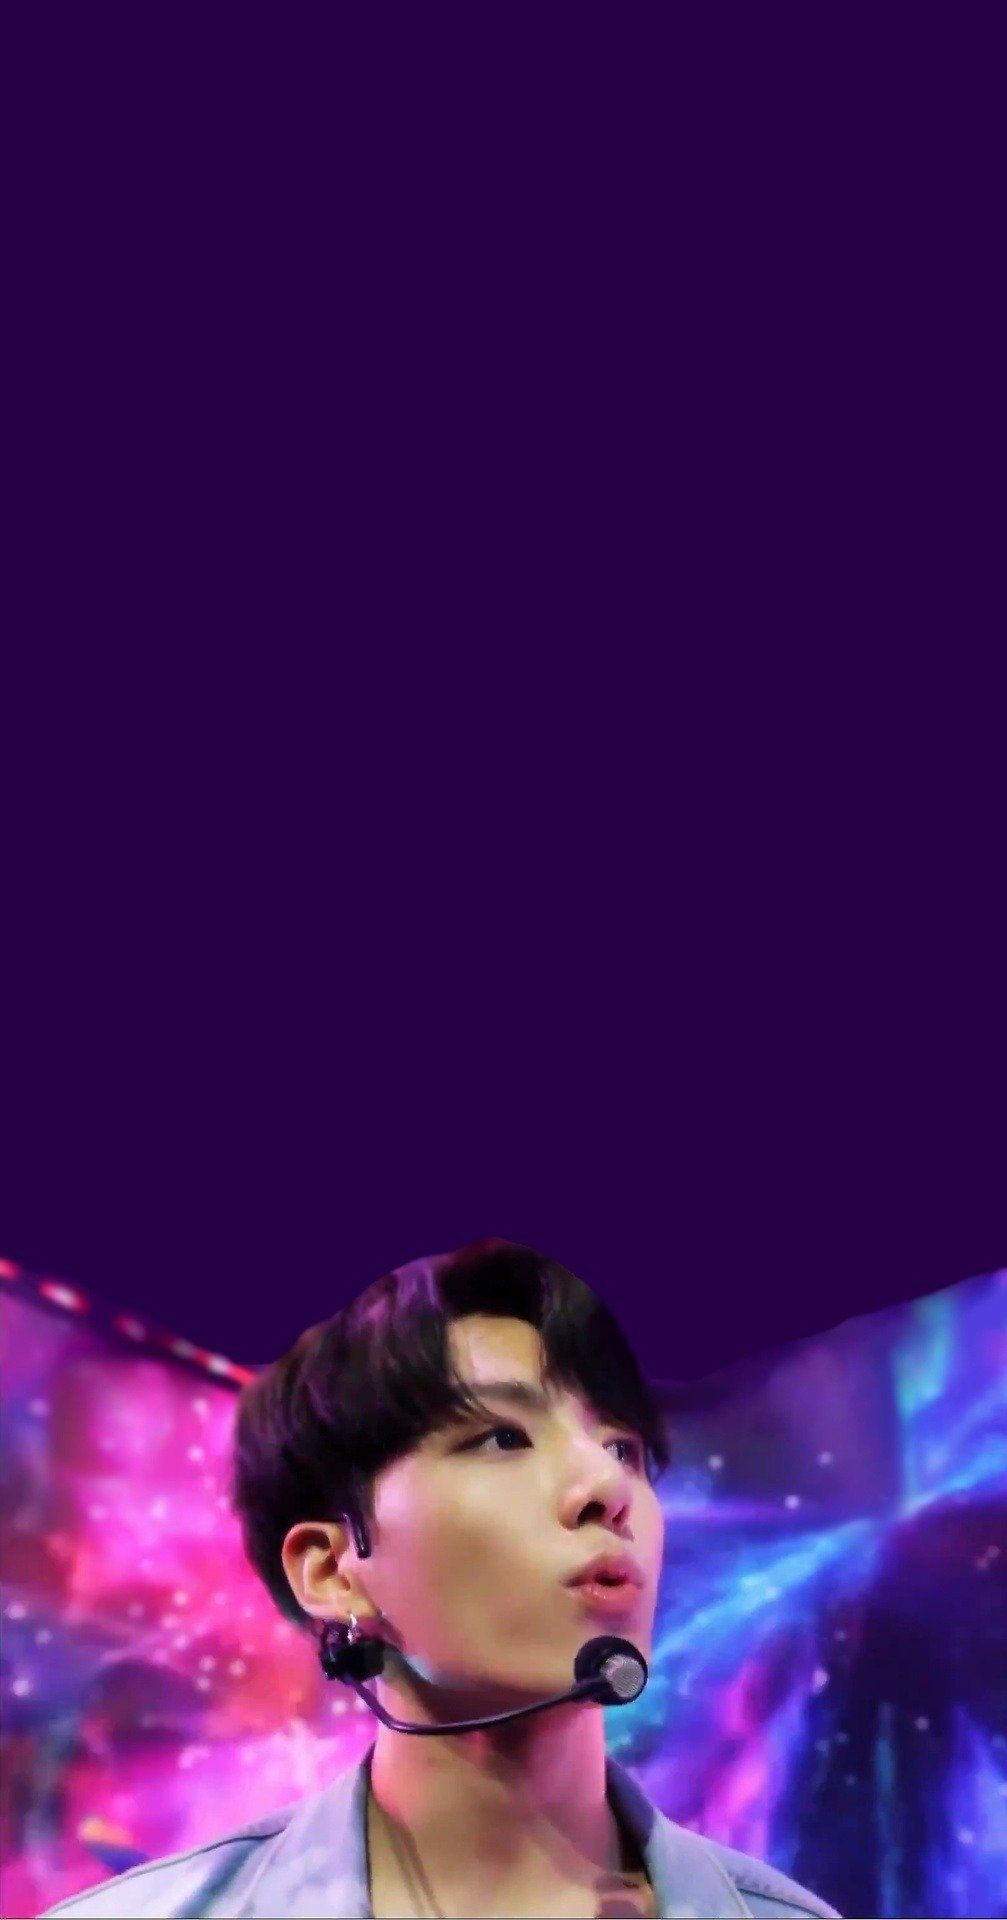 Kpop Live Wallpaper Android